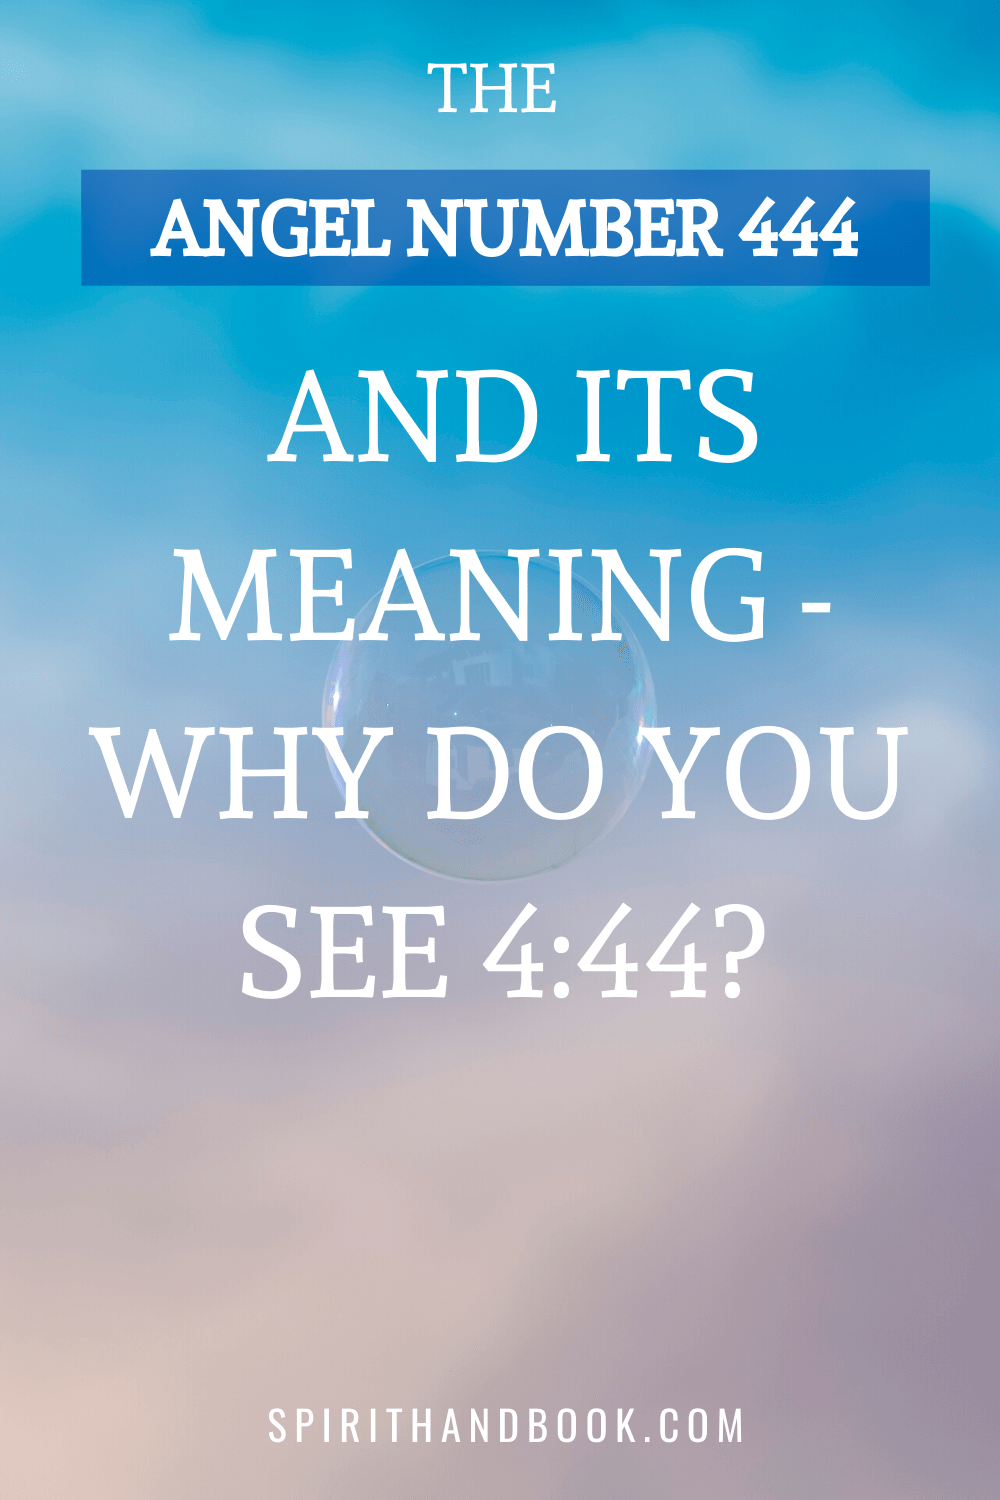 You are currently viewing Angel Number 444 And Its Meaning – Why Do You See 4:44?